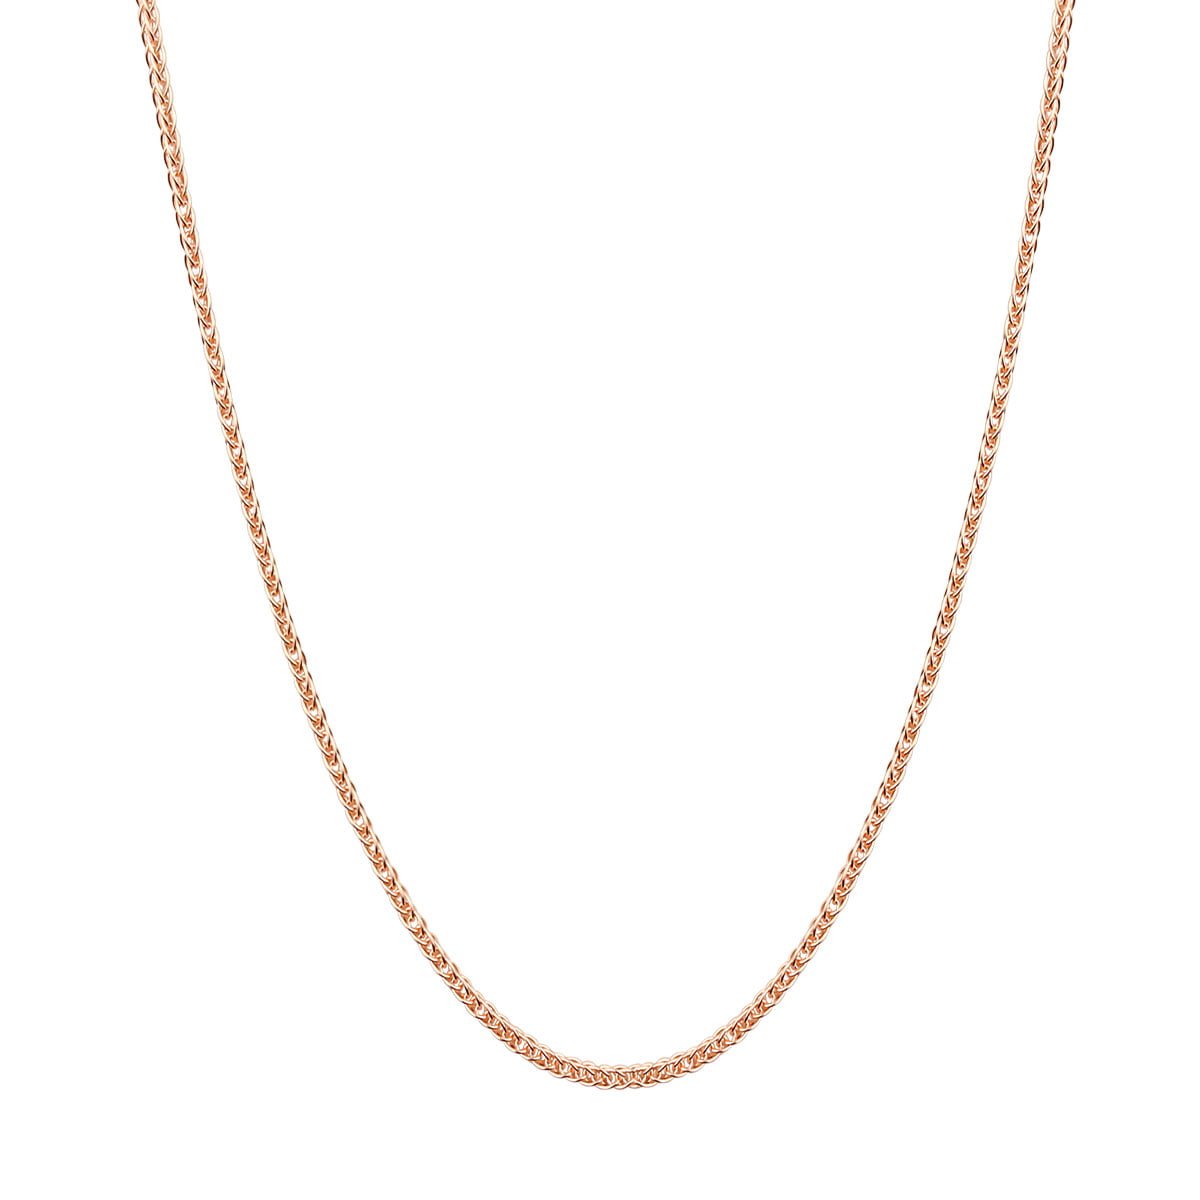 Sipga 18ct Rose Gold 17inch Wheat Chain Necklace